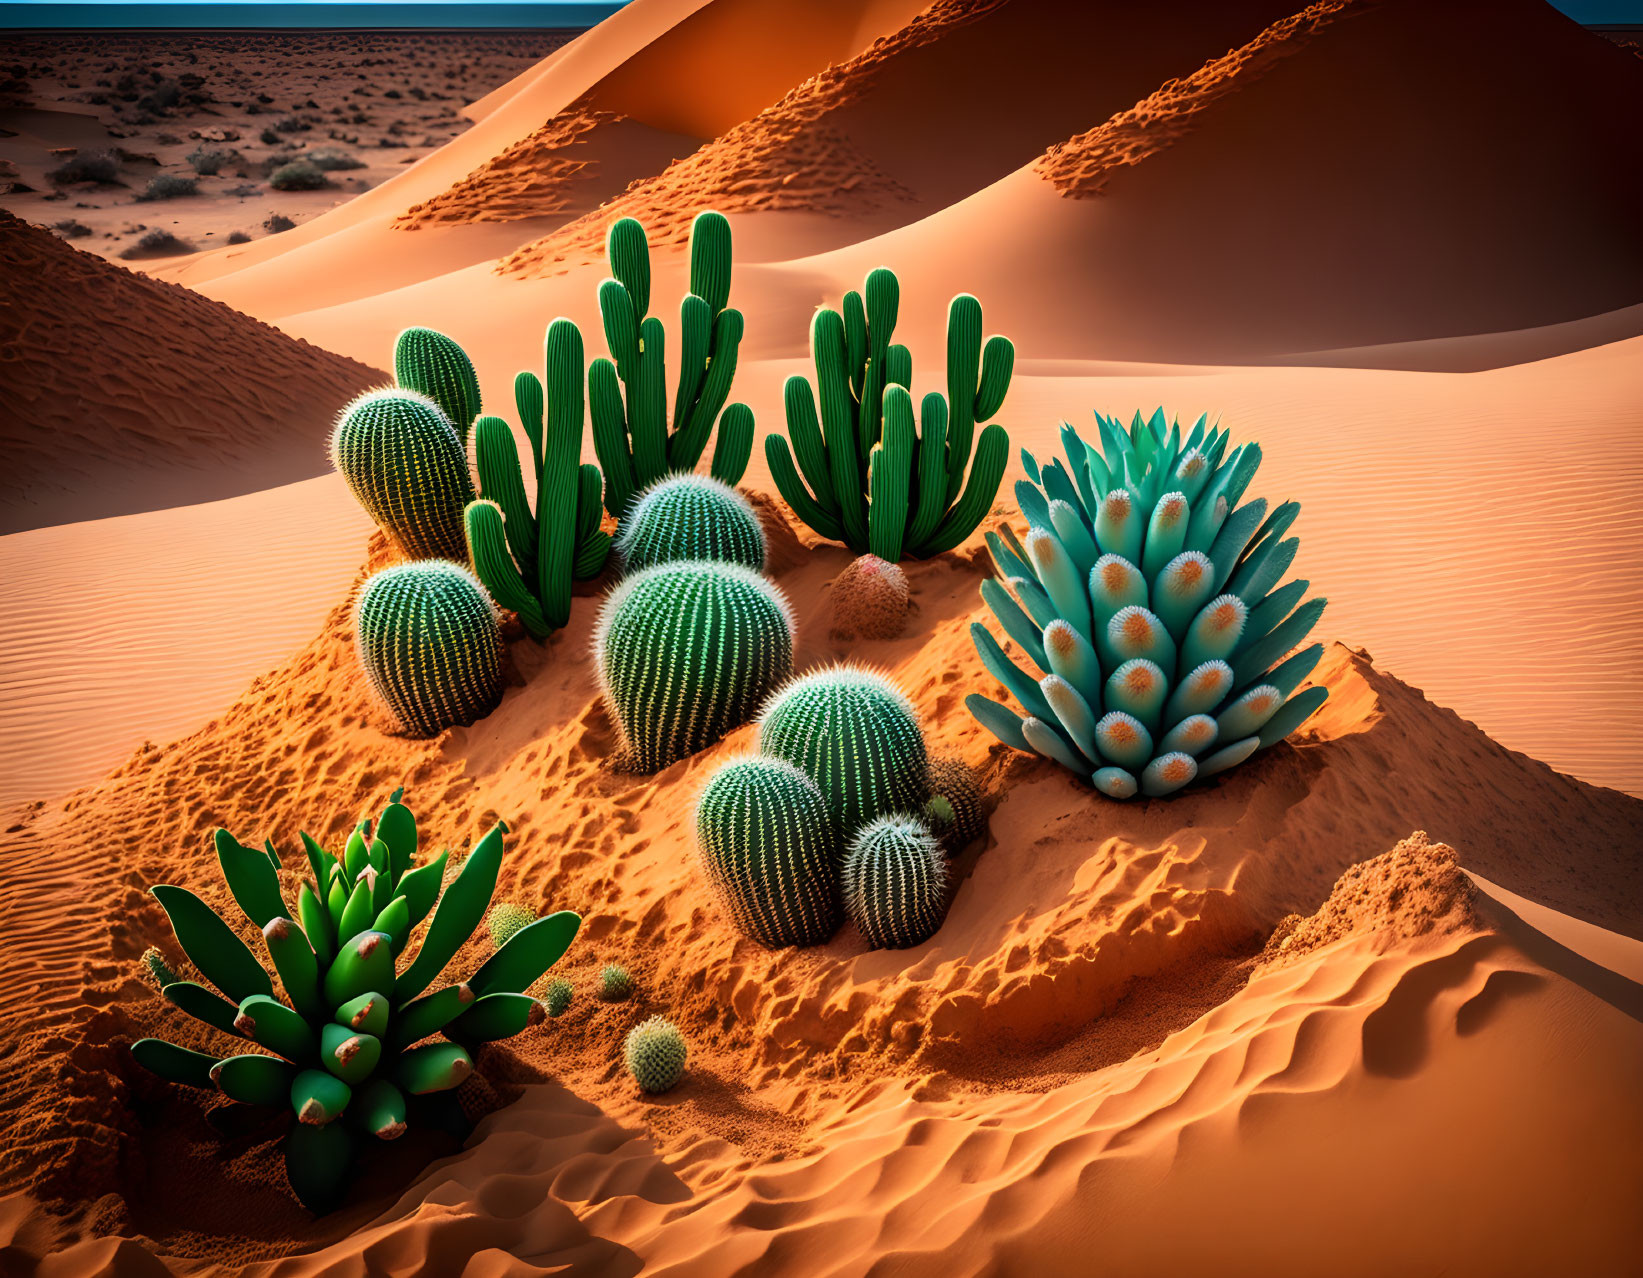 Various Shapes and Sizes of Cacti in Sandy Desert Landscape